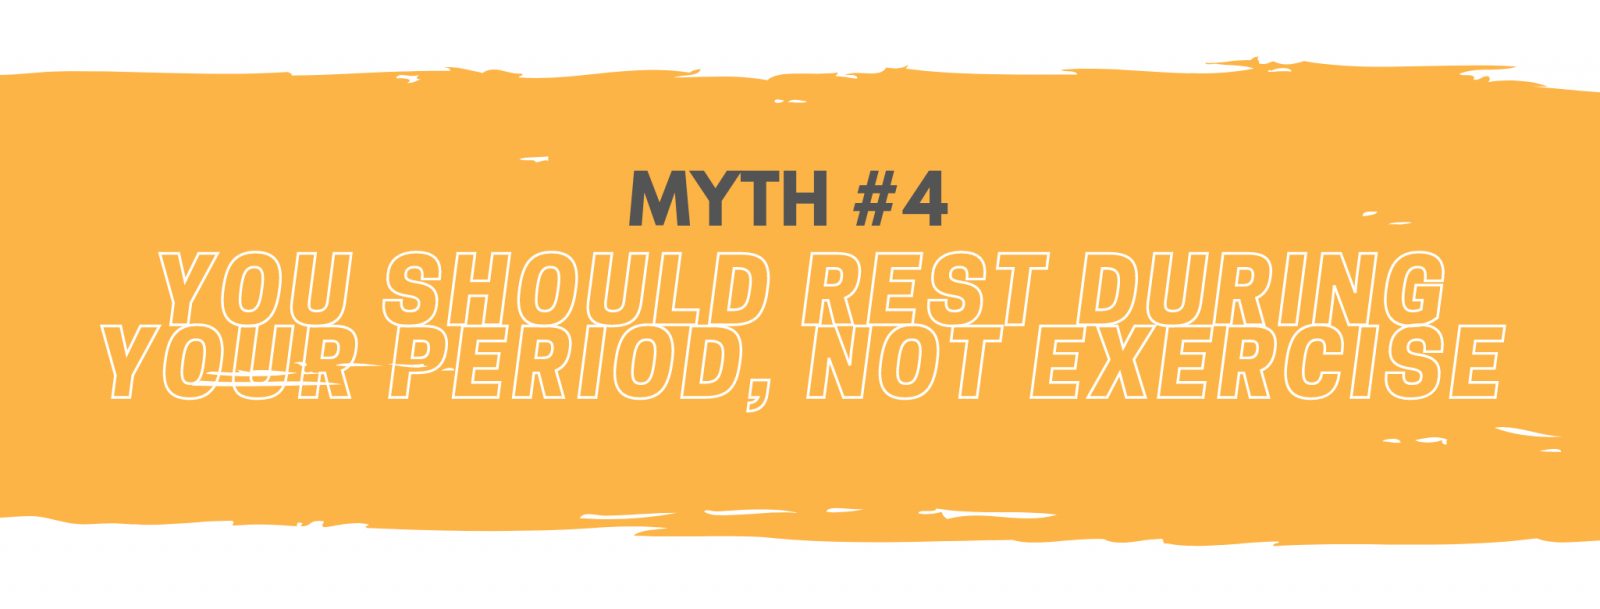 Rest during your period myth